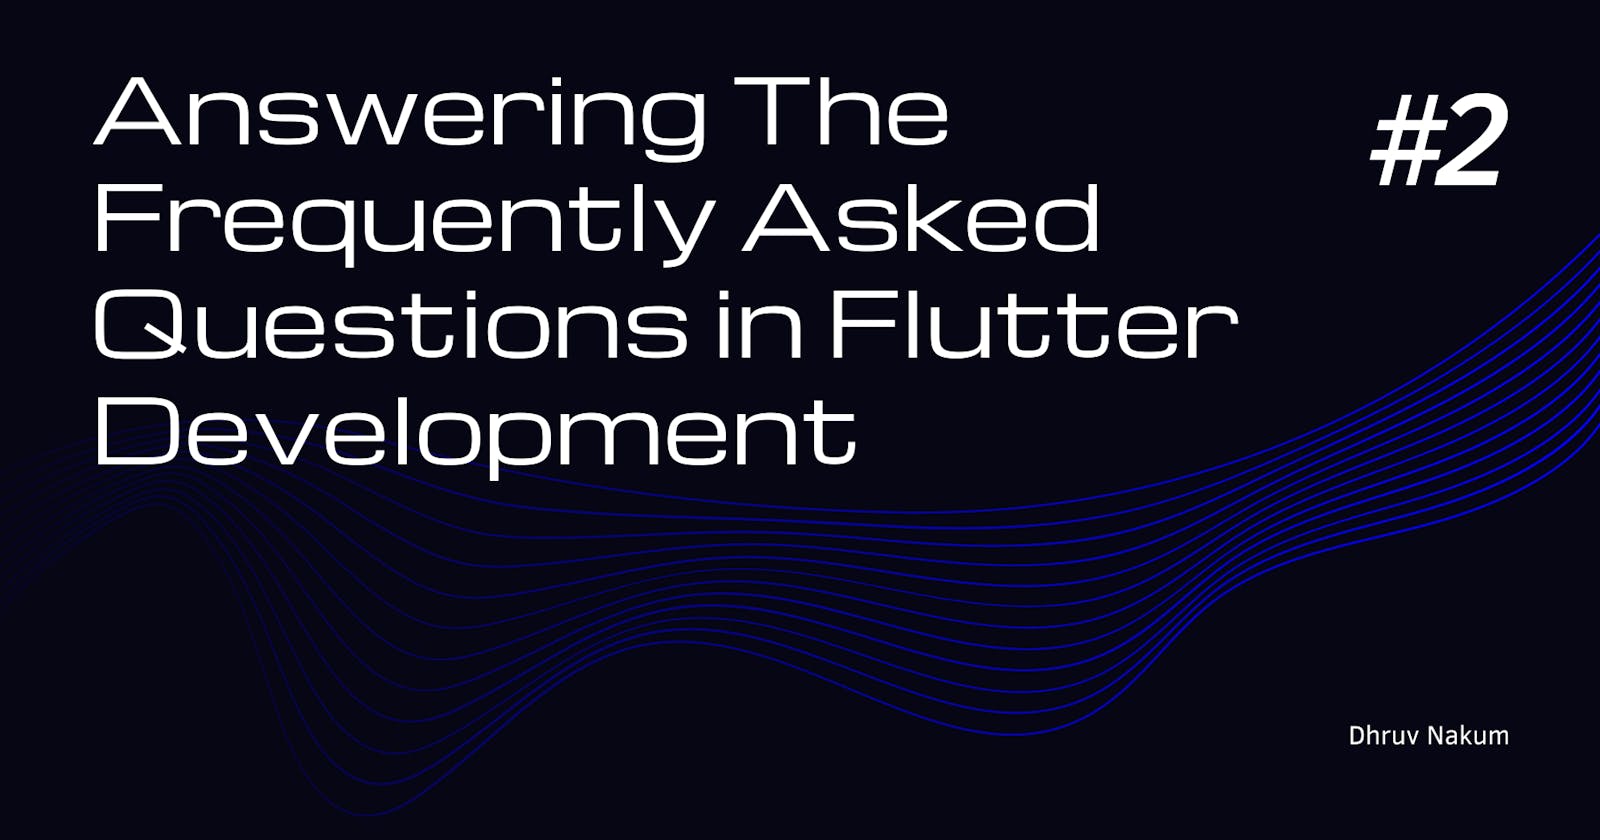 Answering The Frequently Asked Questions in Flutter Development #2